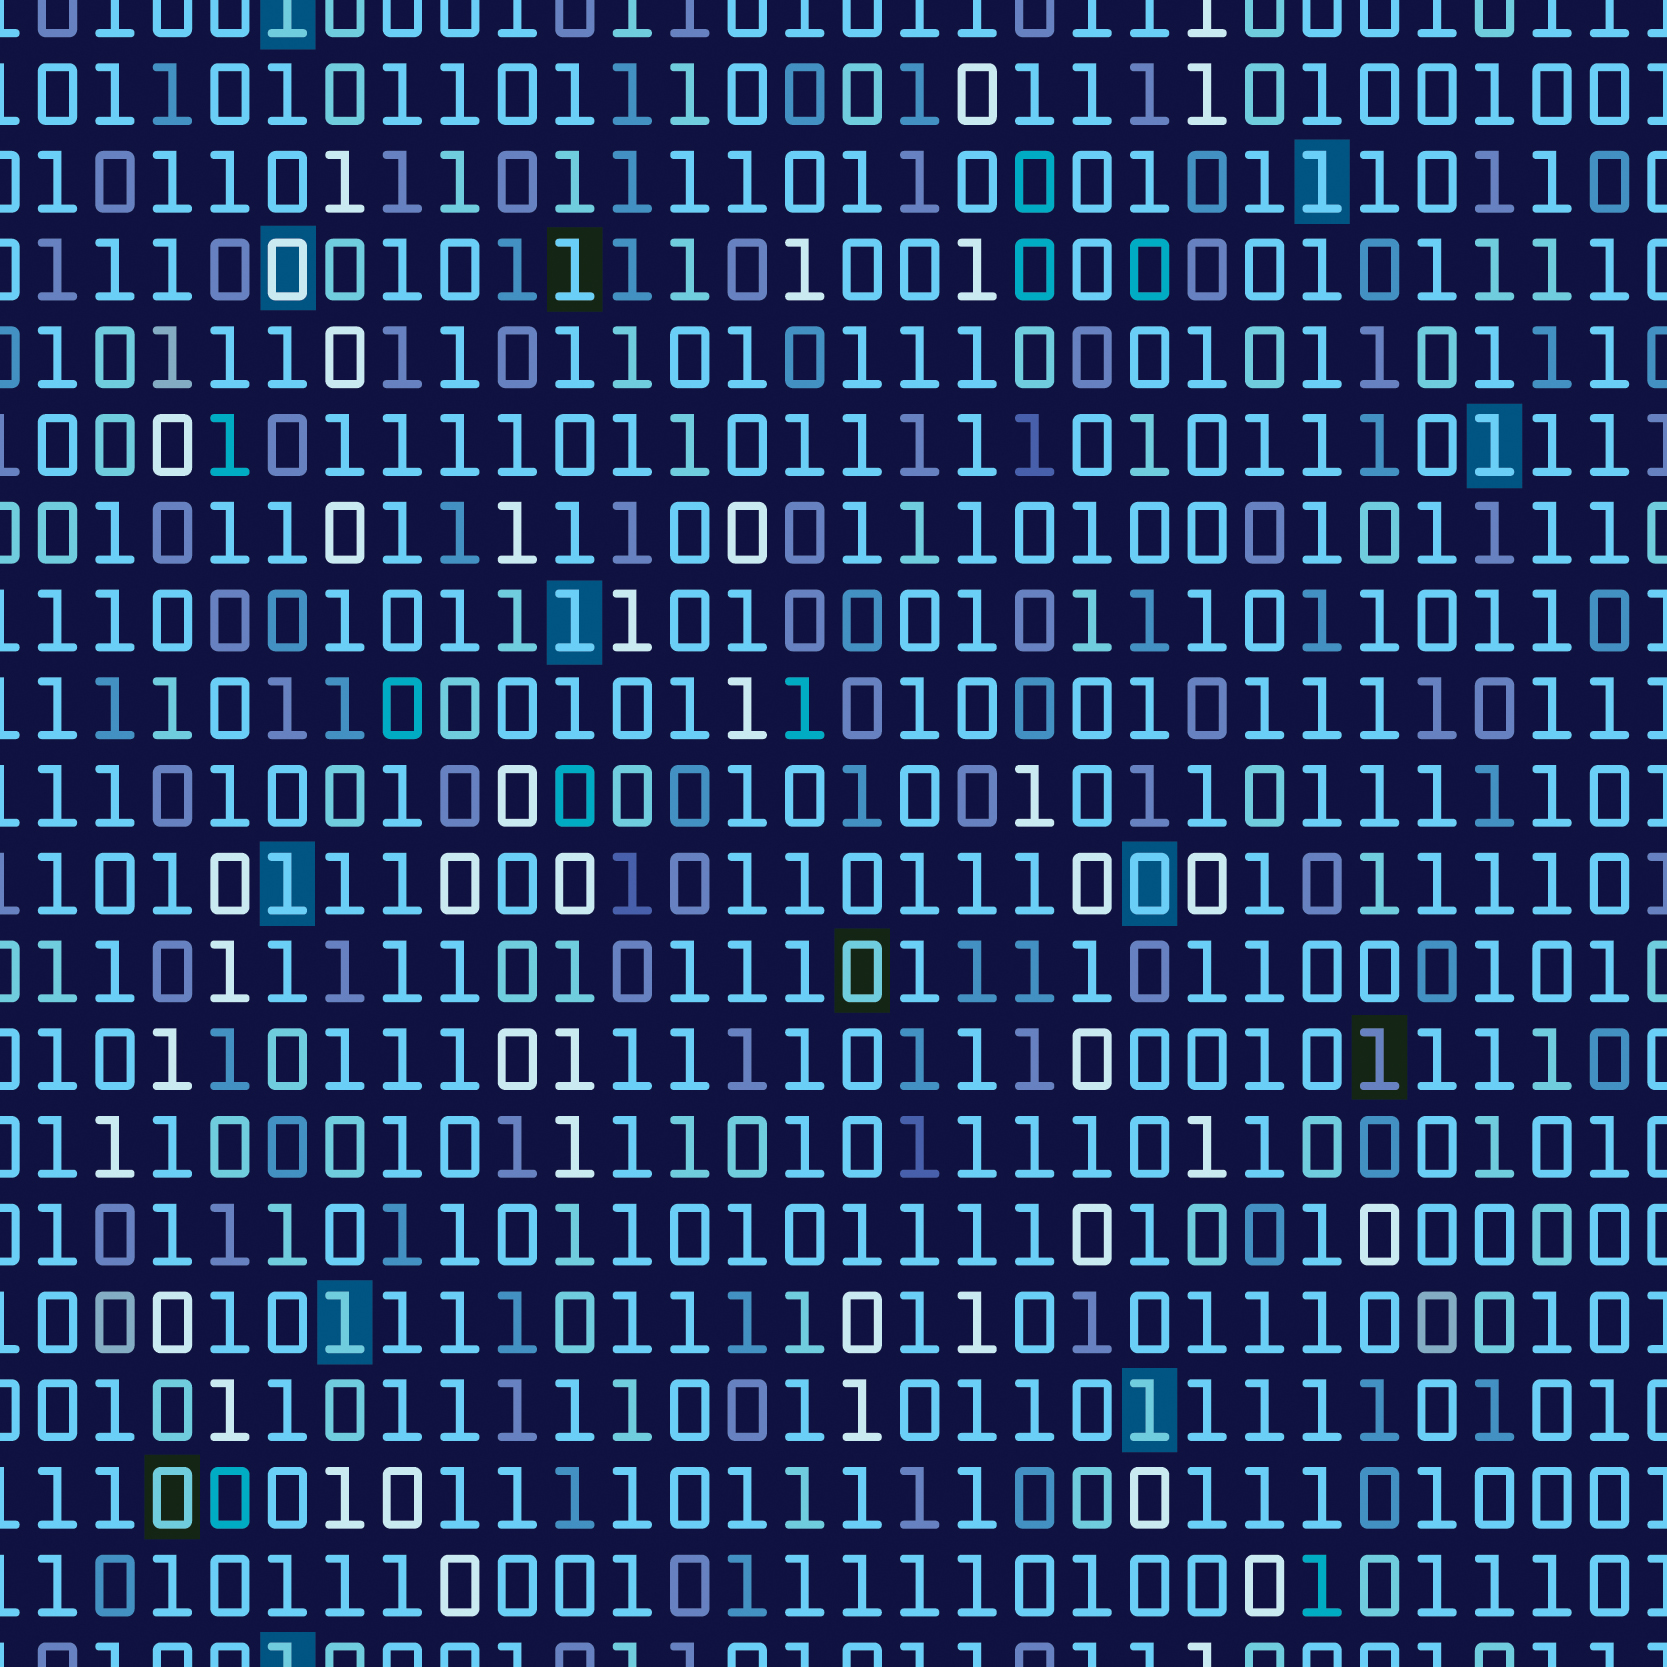 Blue binary computer code repeating vector background illustration